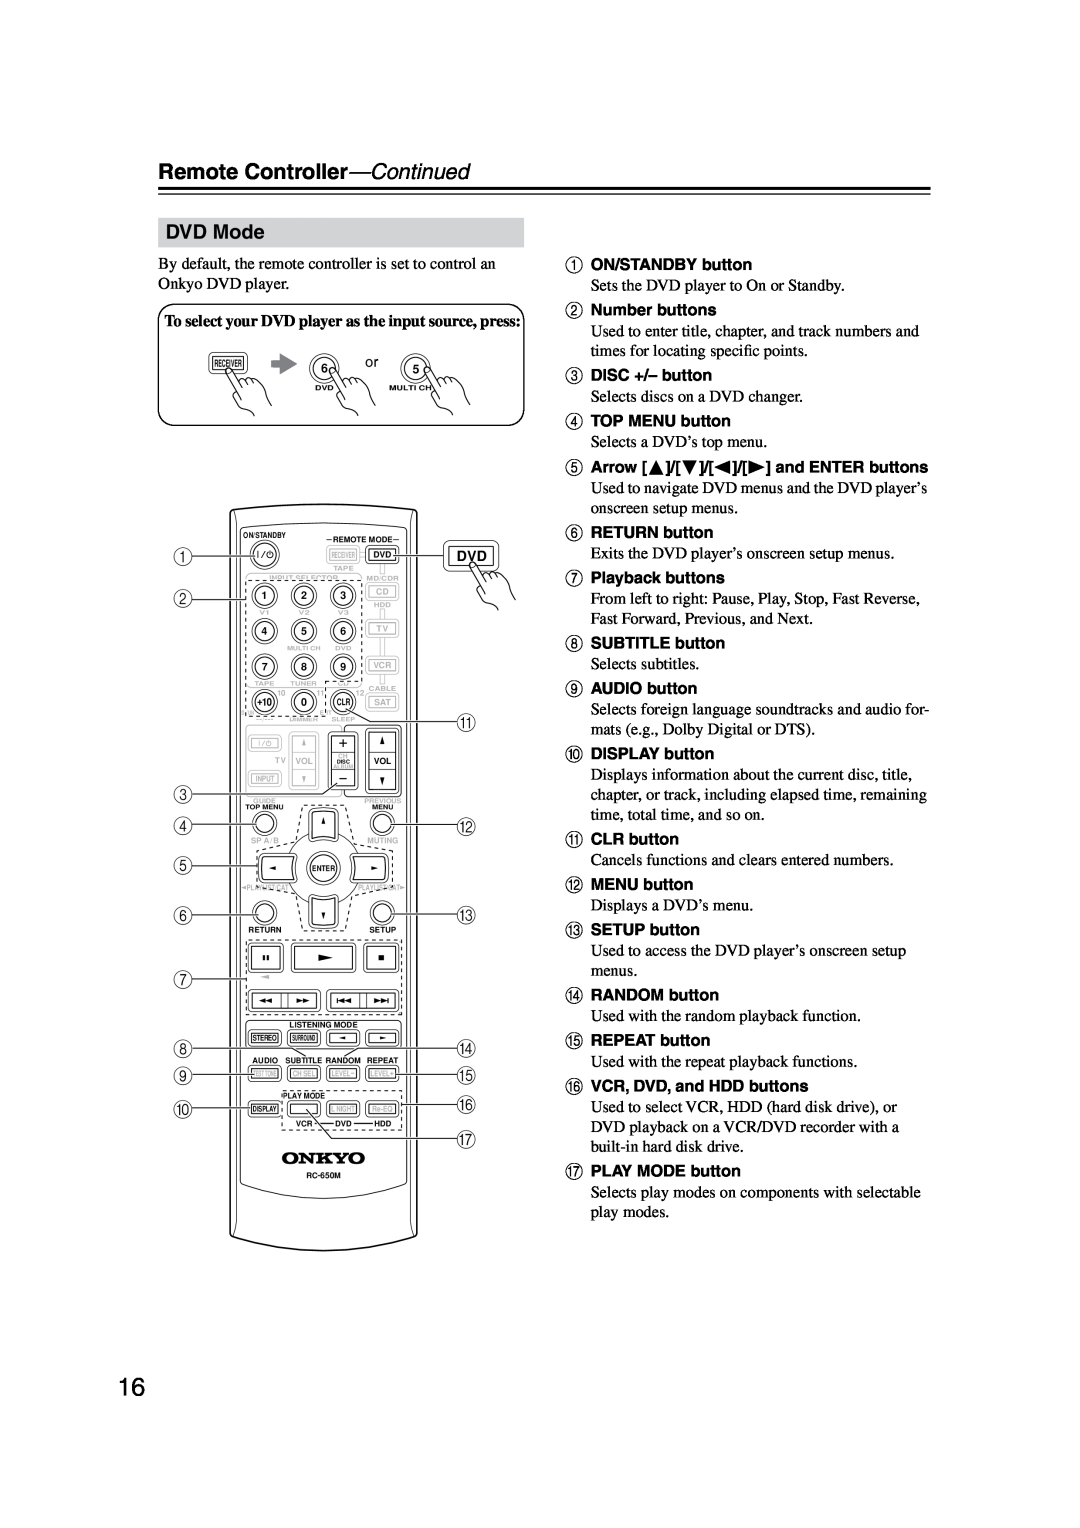 Onkyo HT-S990THX instruction manual DVD Mode, 1 2 3 4 5 6 7 8 9 J, Remote Controller-Continued 